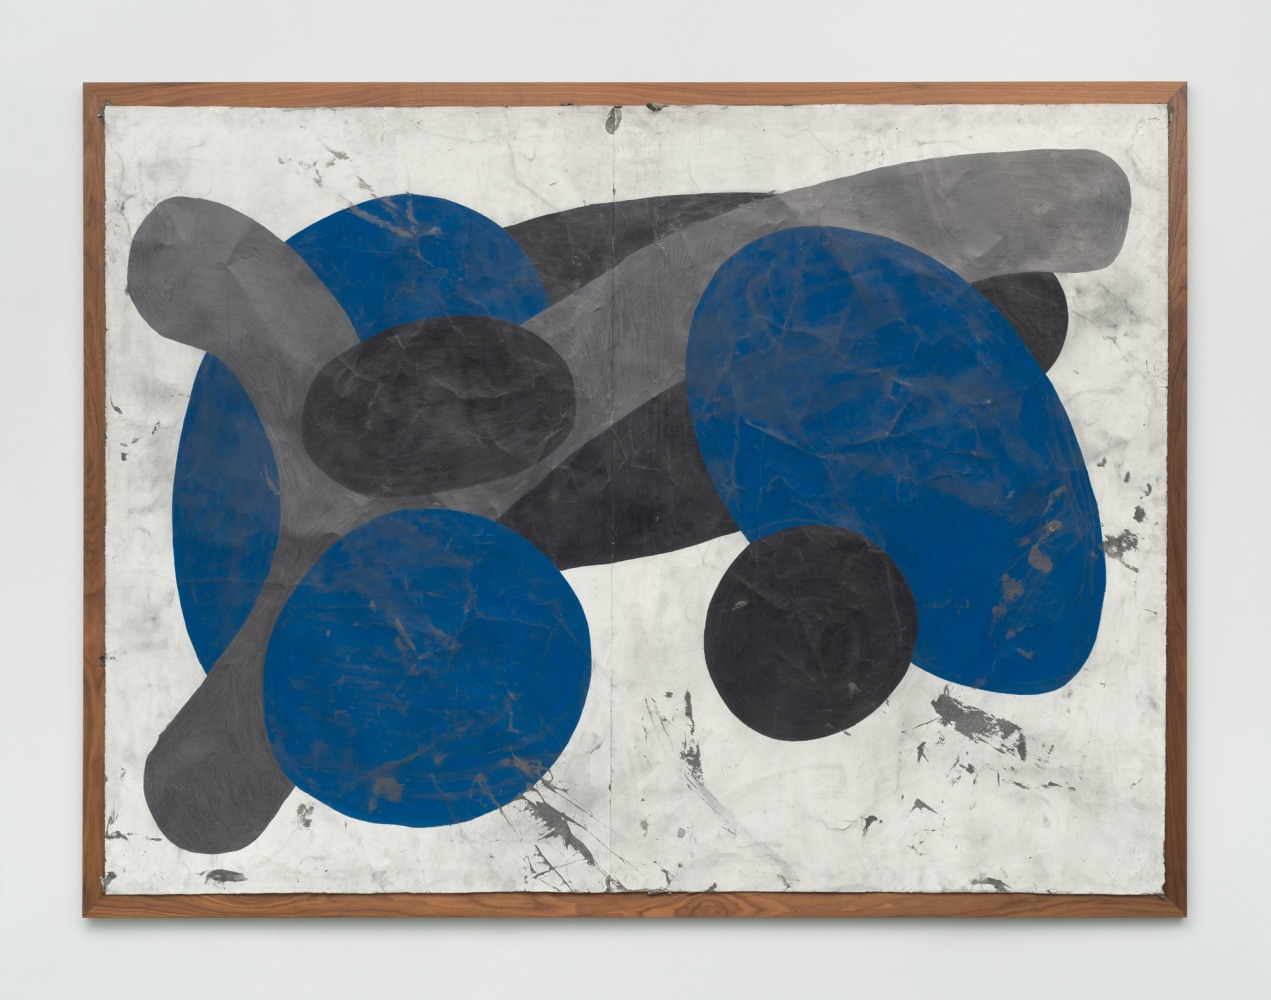 Tony Lewis
Stand, 2019
Graphite, pencil and colored pencil on paper mounted on wood
75 &amp;frac34; &amp;times; 100 &amp;times; 1 in.
(192.4 &amp;times; 254 &amp;times; 2.5 cm)